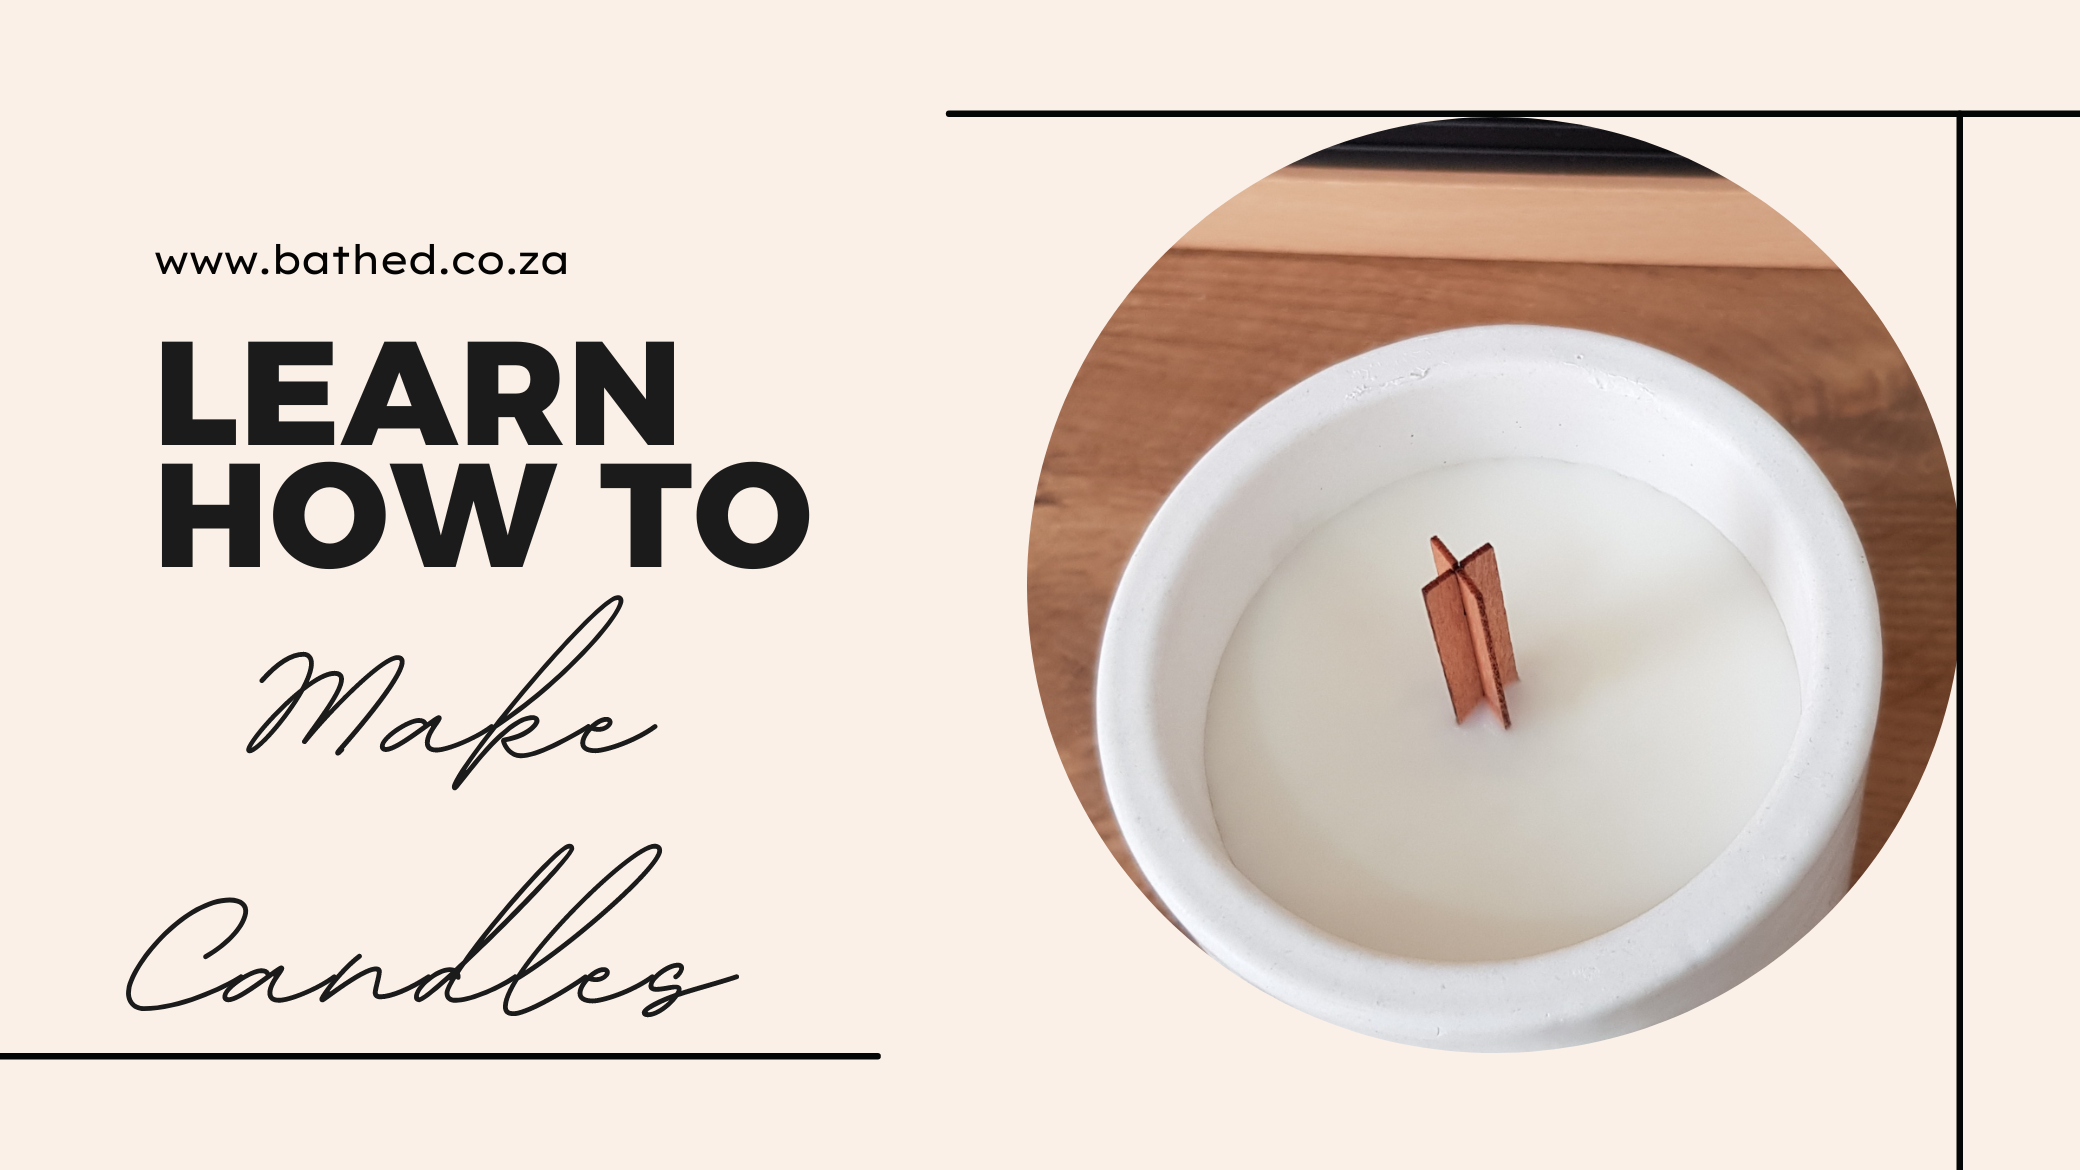 Load video: Learn how to make candles